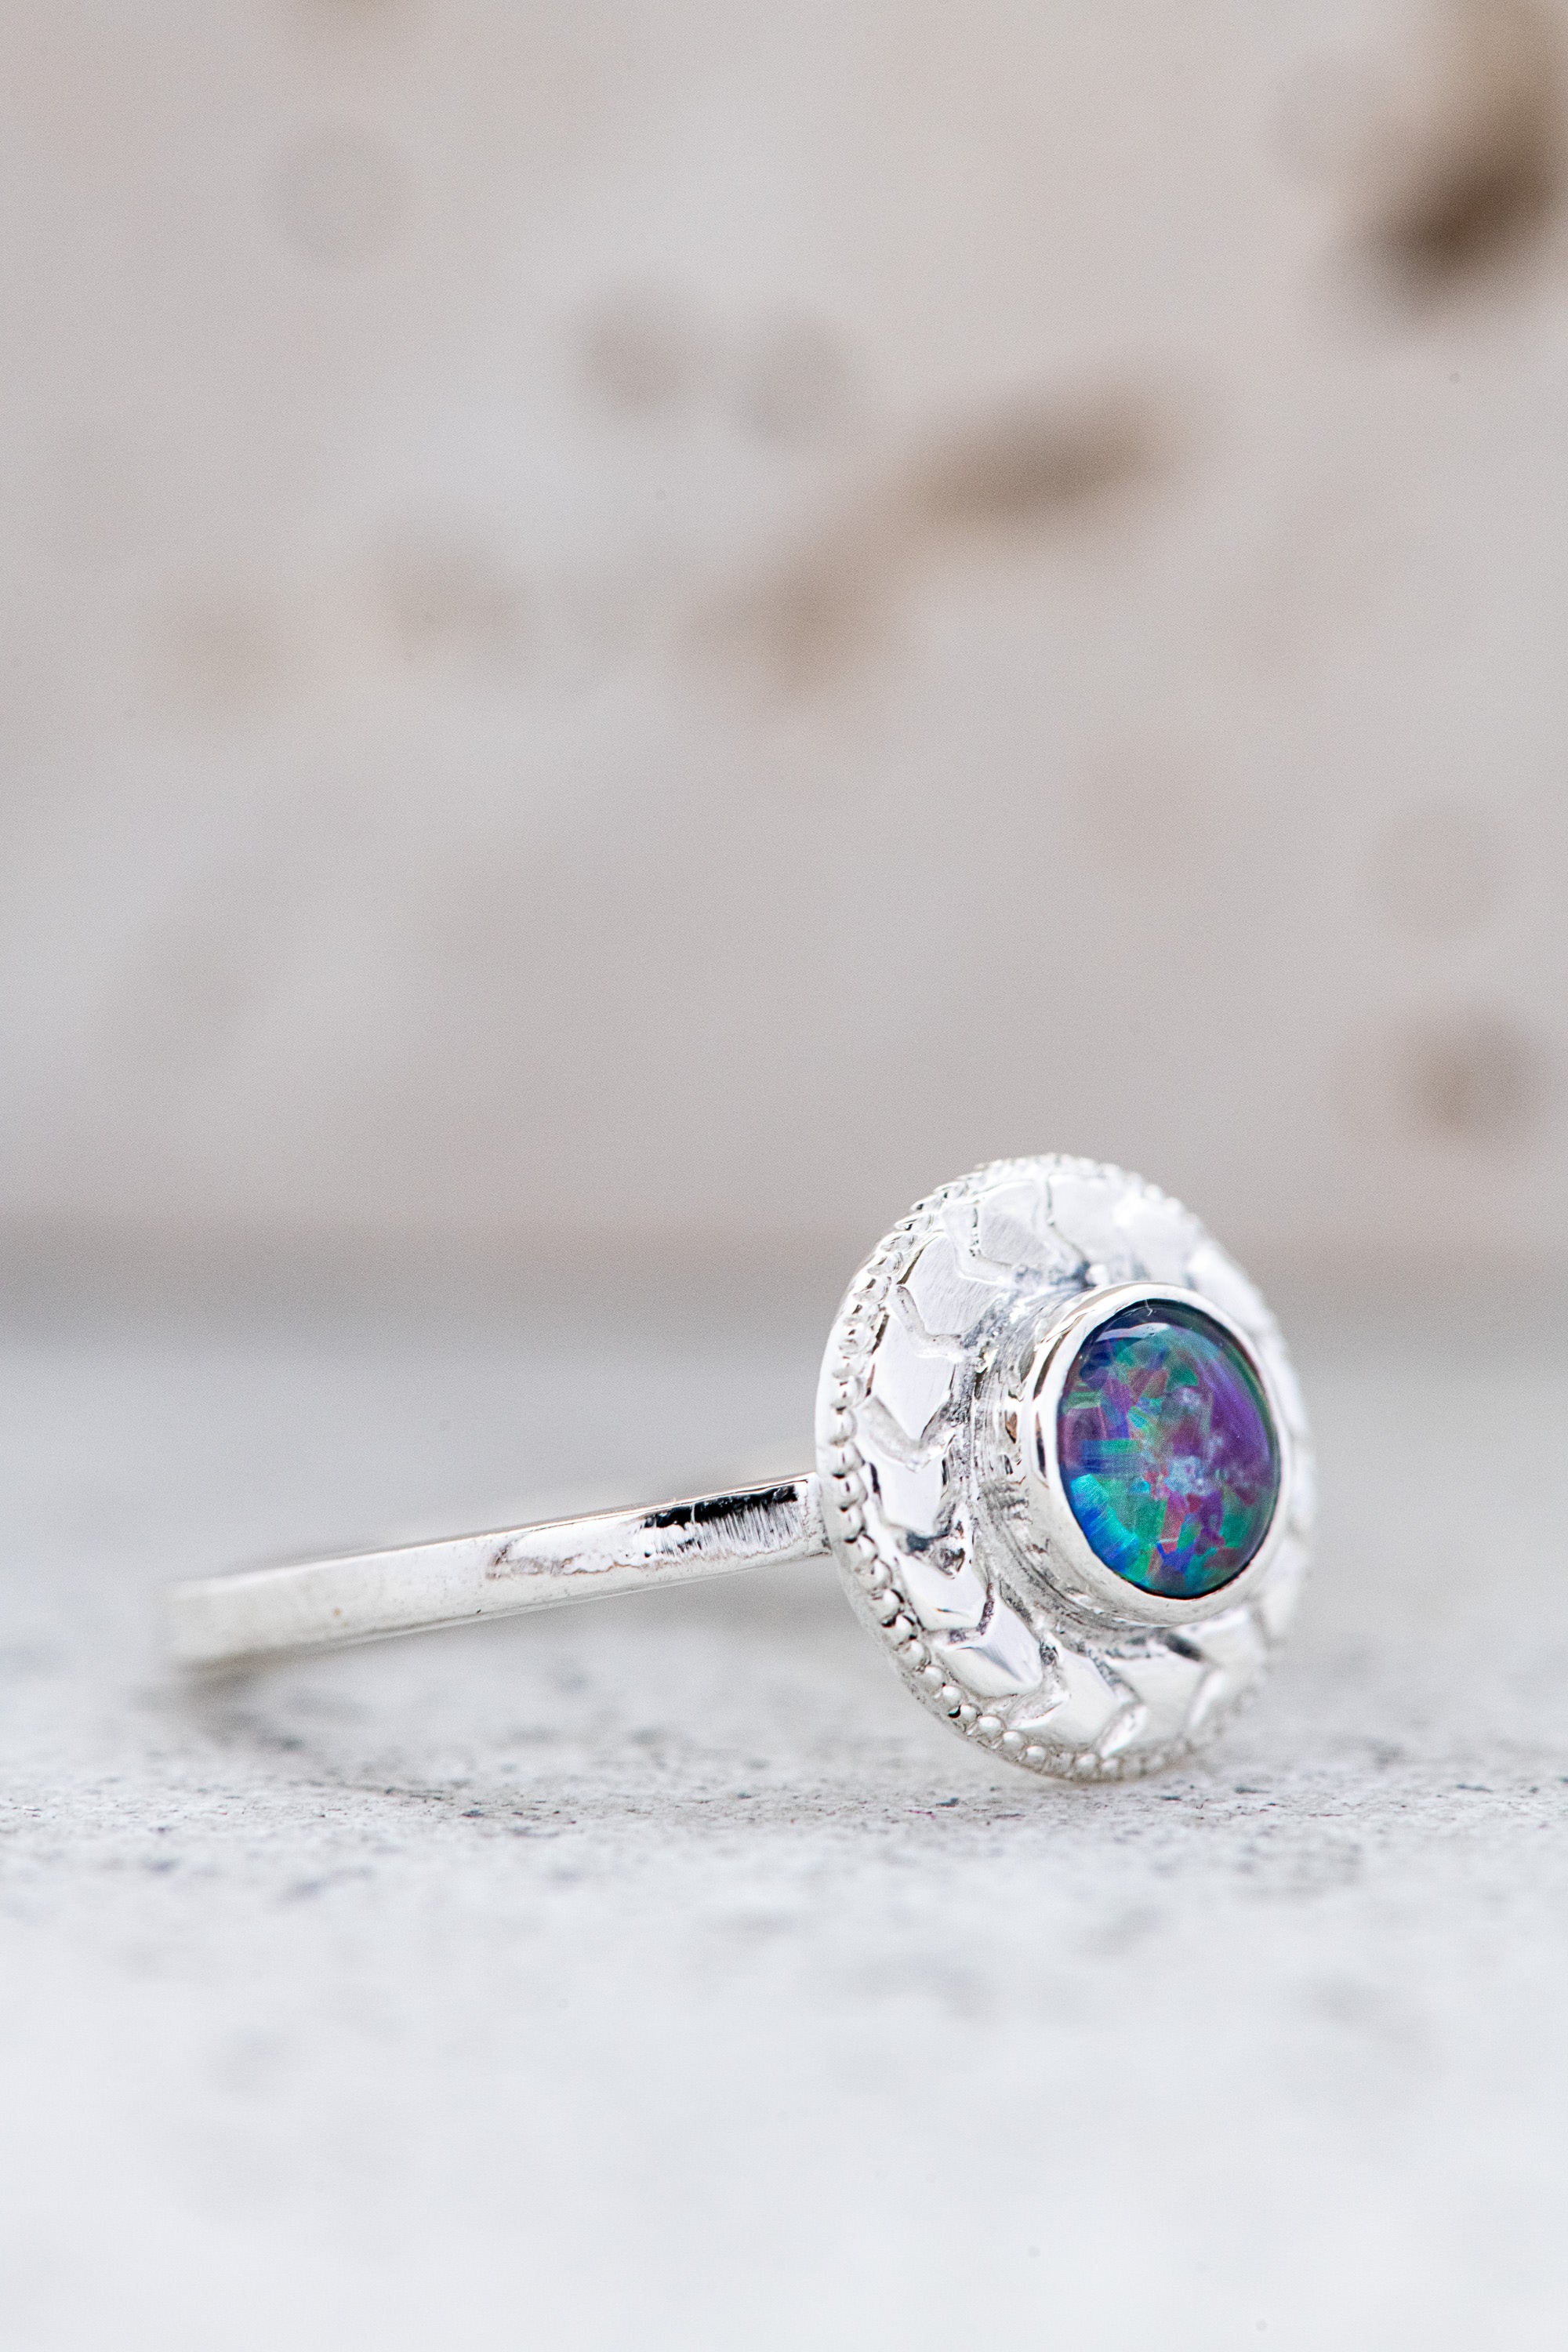 Teardrop White Opal Stone Bridal Ring Set- Pear White Gem Engagement 2 Ring  Set- Chalcedony Halo Sterling Silver Ring w/ Wedding Band